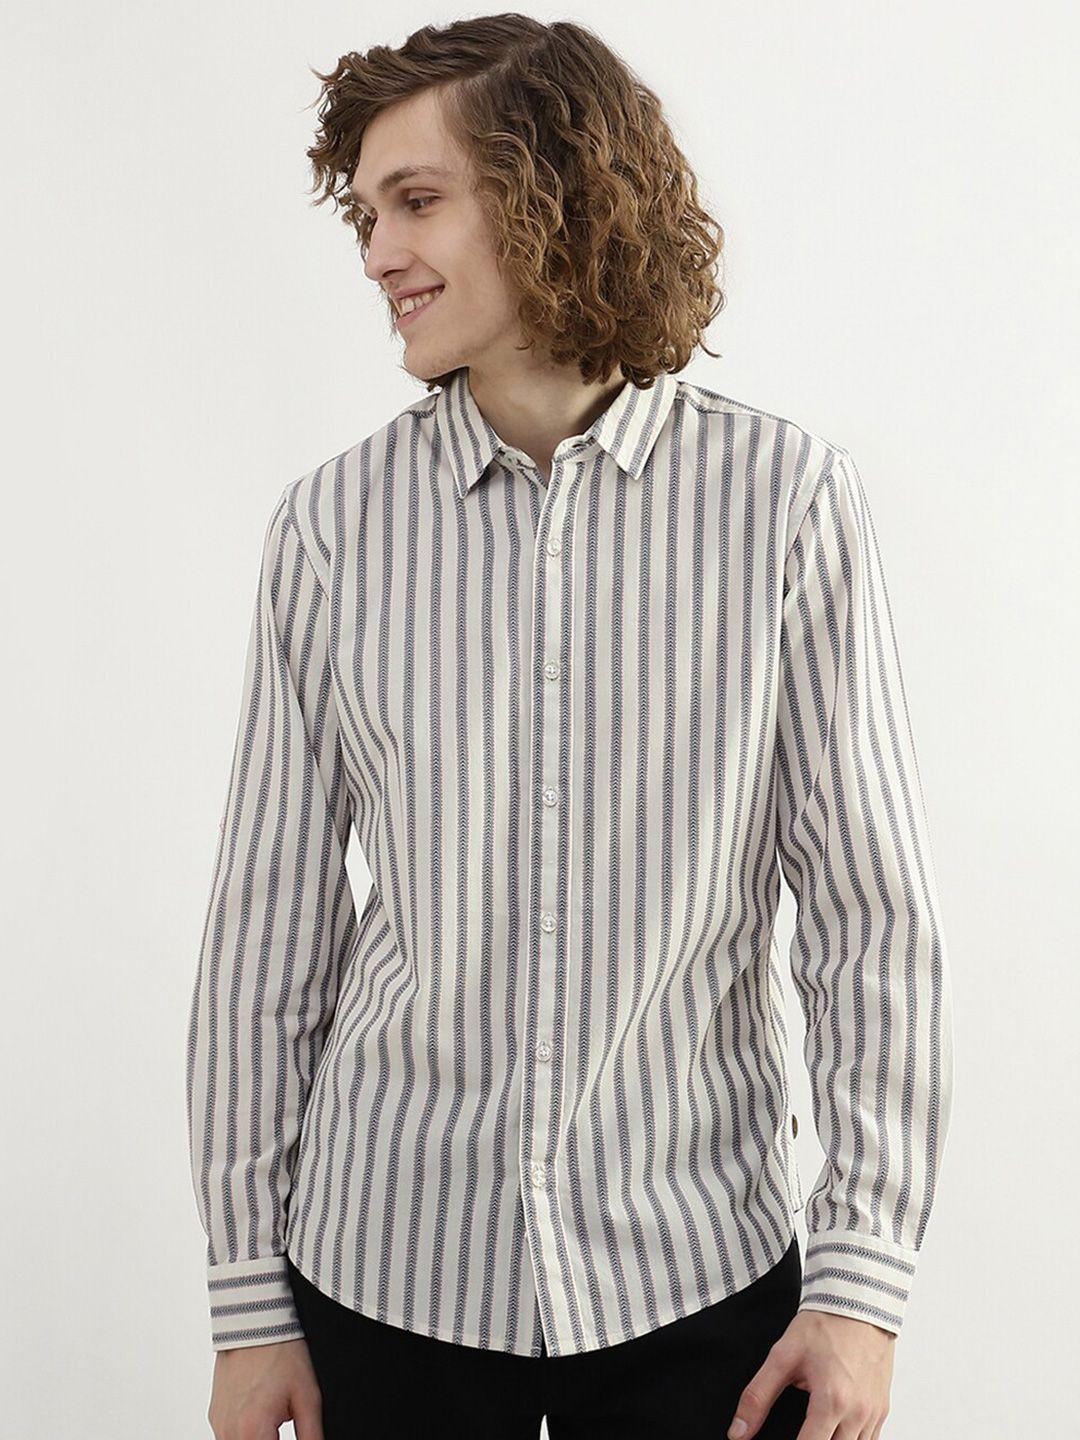 united-colors-of-benetton-men-slim-fit-striped-casual-cotton-shirt